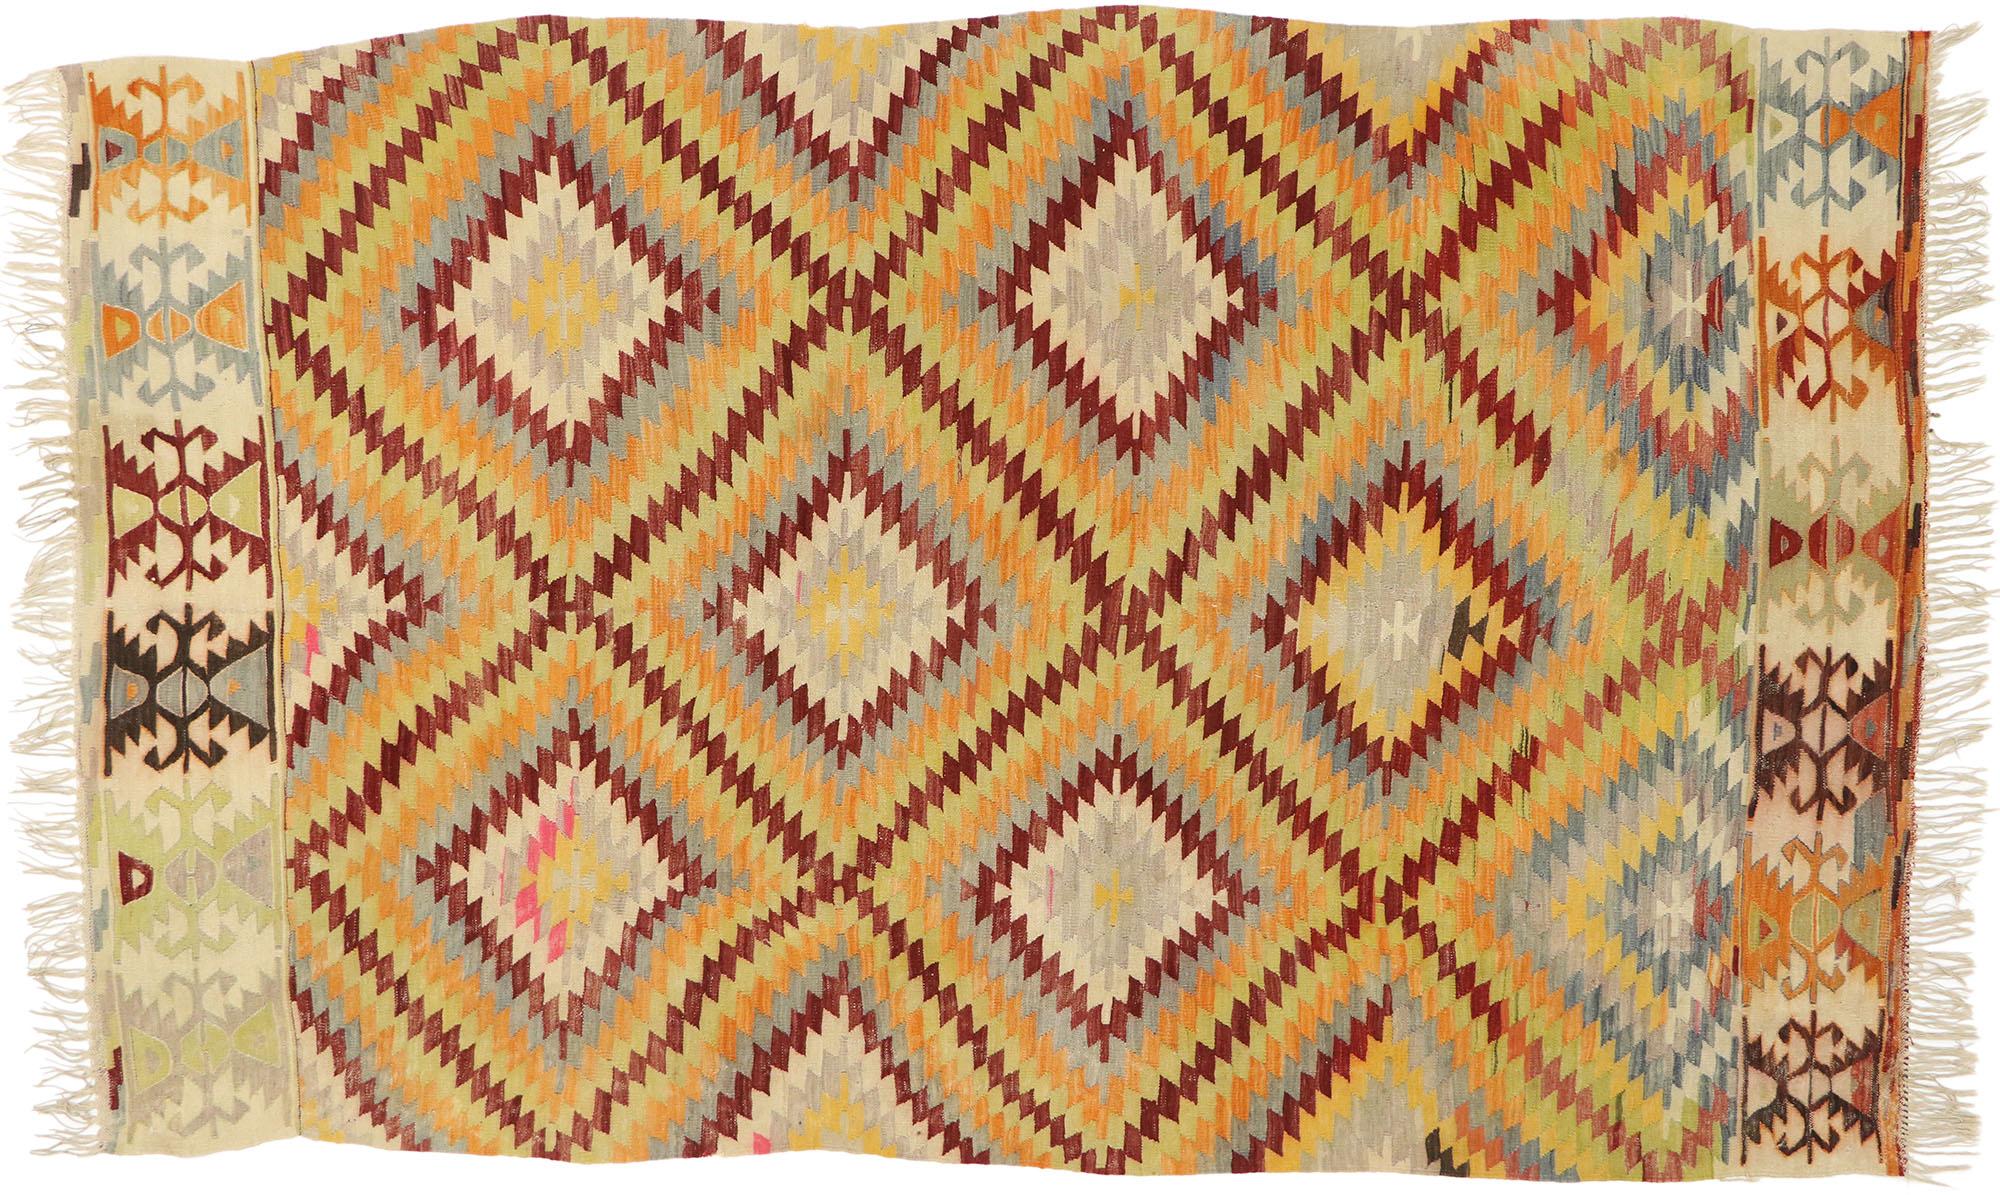 71061 Vintage Turkish Kilim Rug with Southwestern Desert Style. This hand-woven wool vintage Turkish Kilim rug features an all-over geometric trellis pattern composed of expanding lozenges creating a diamond lattice. The end caps beautifully display